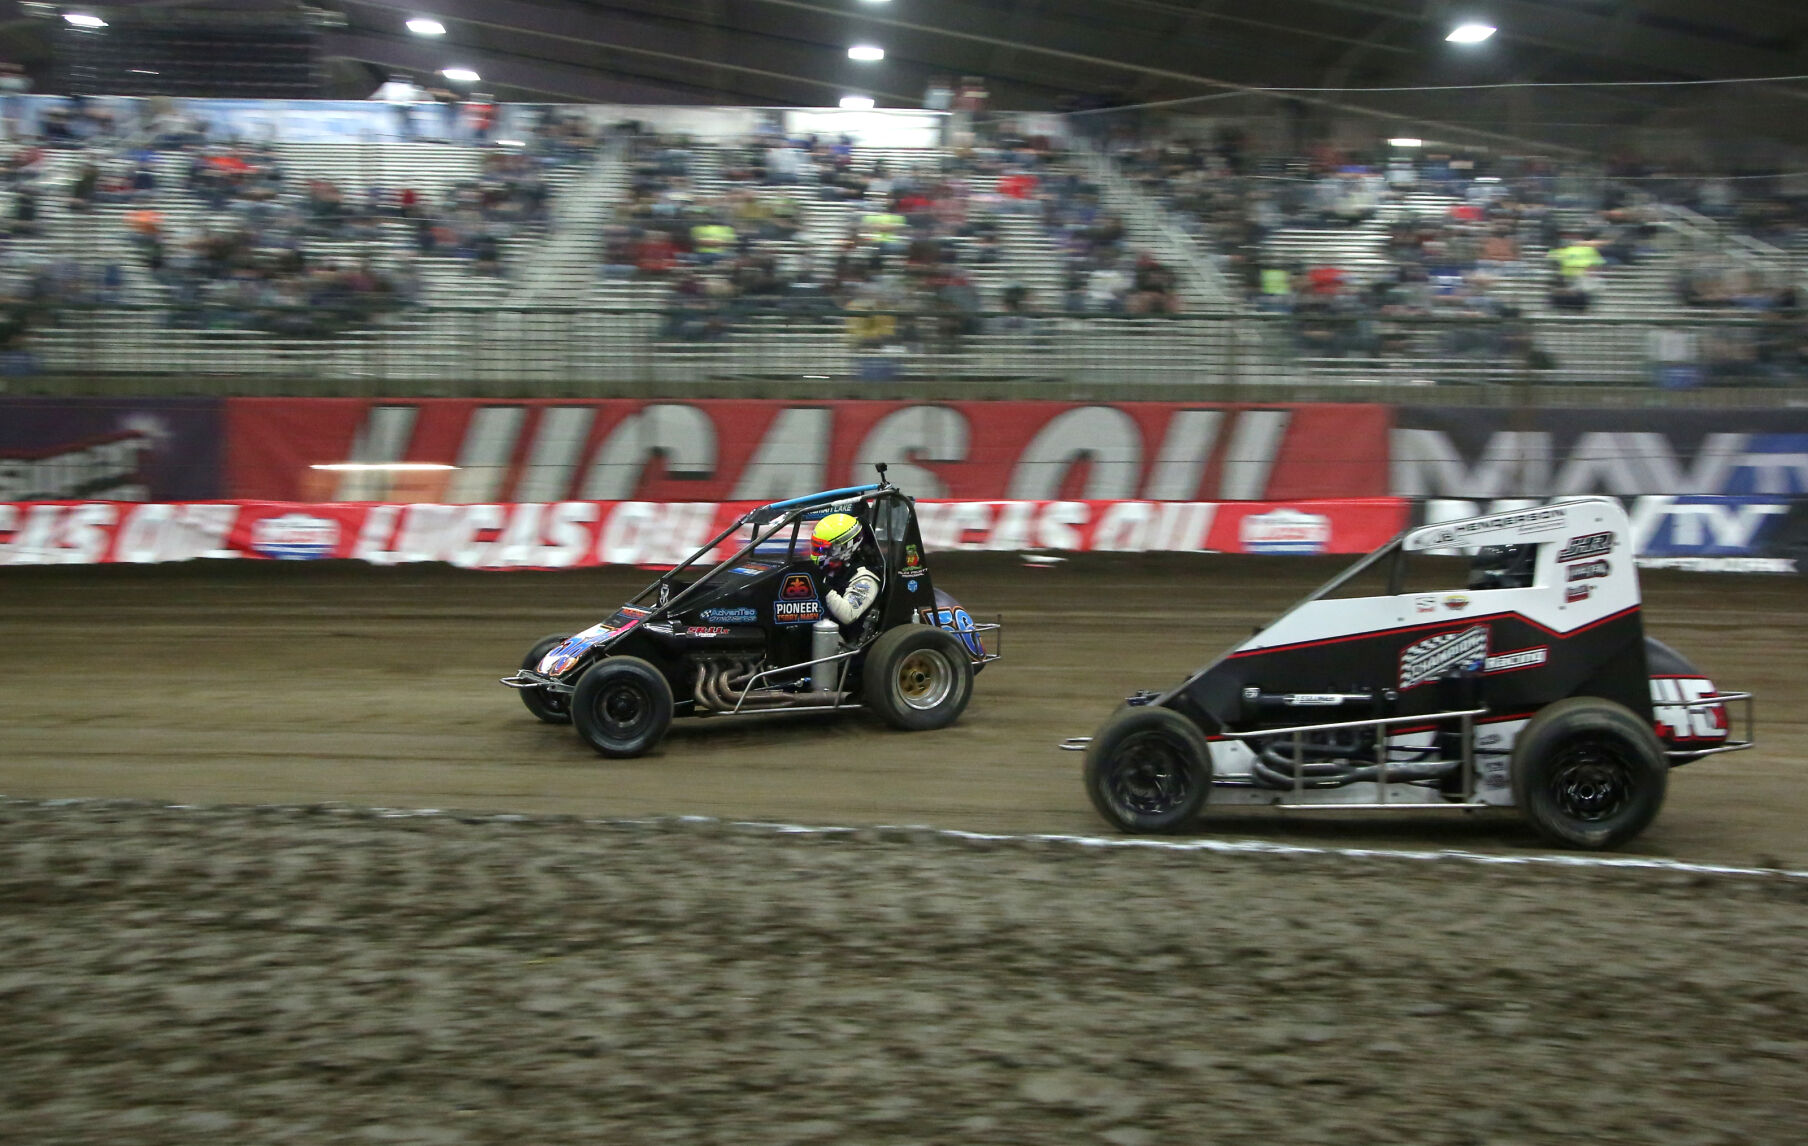 35th annual Chili Bowl Midget Nationals ready to fire off Monday